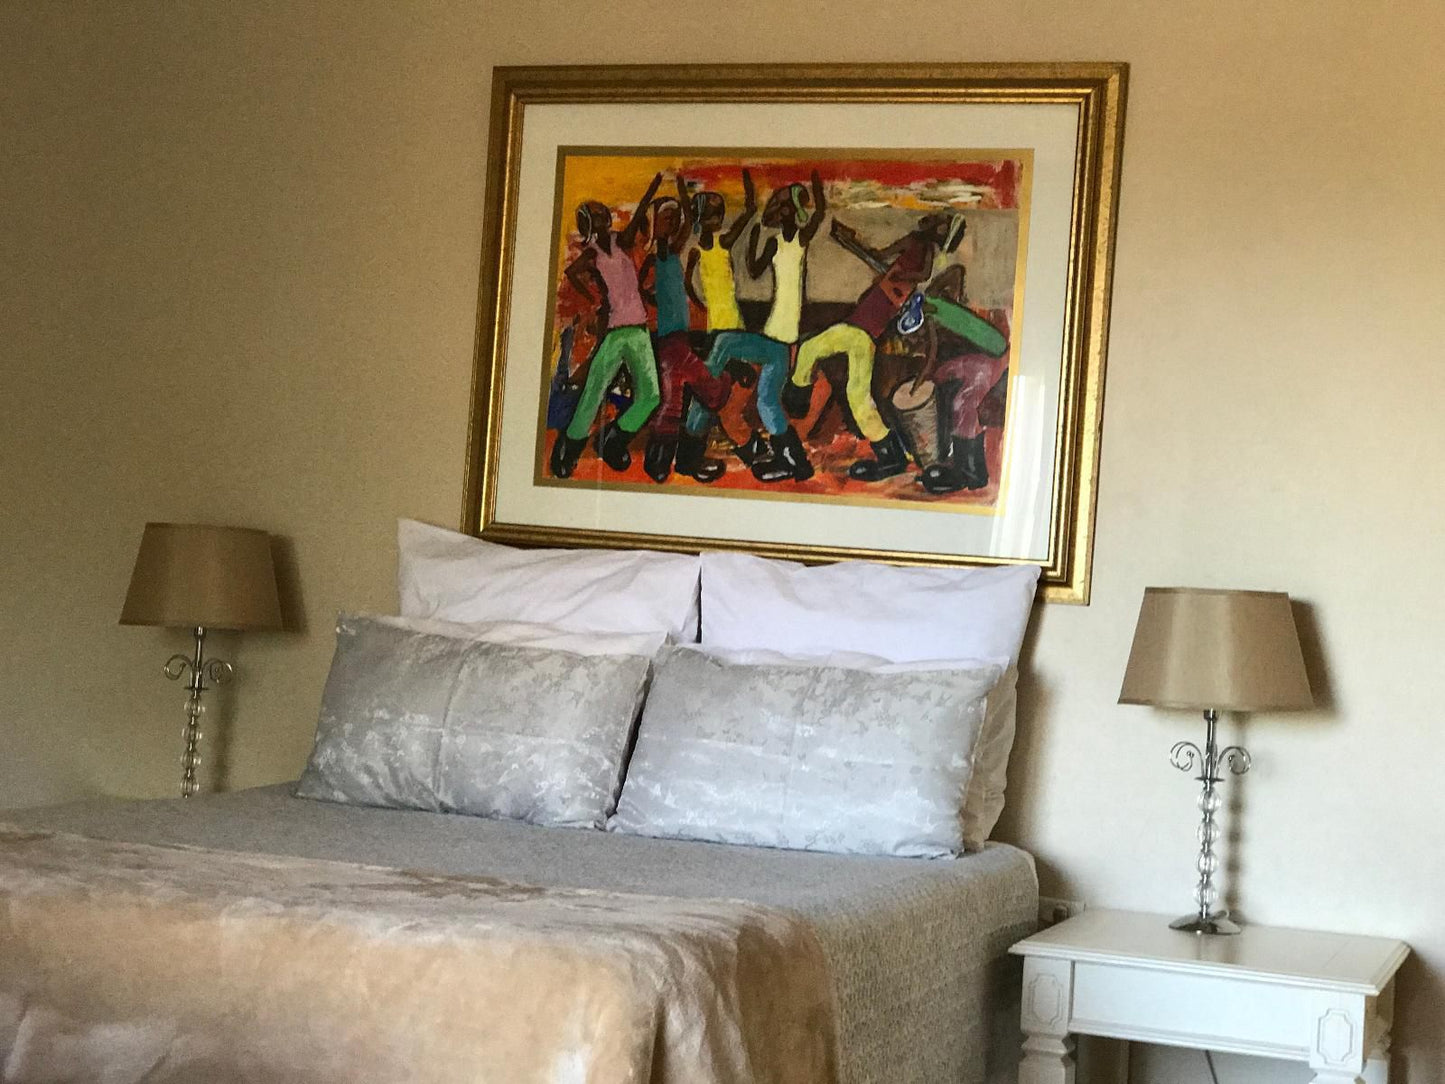 Edens Guesthouse Westville Durban Kwazulu Natal South Africa Painting, Art, Picture Frame